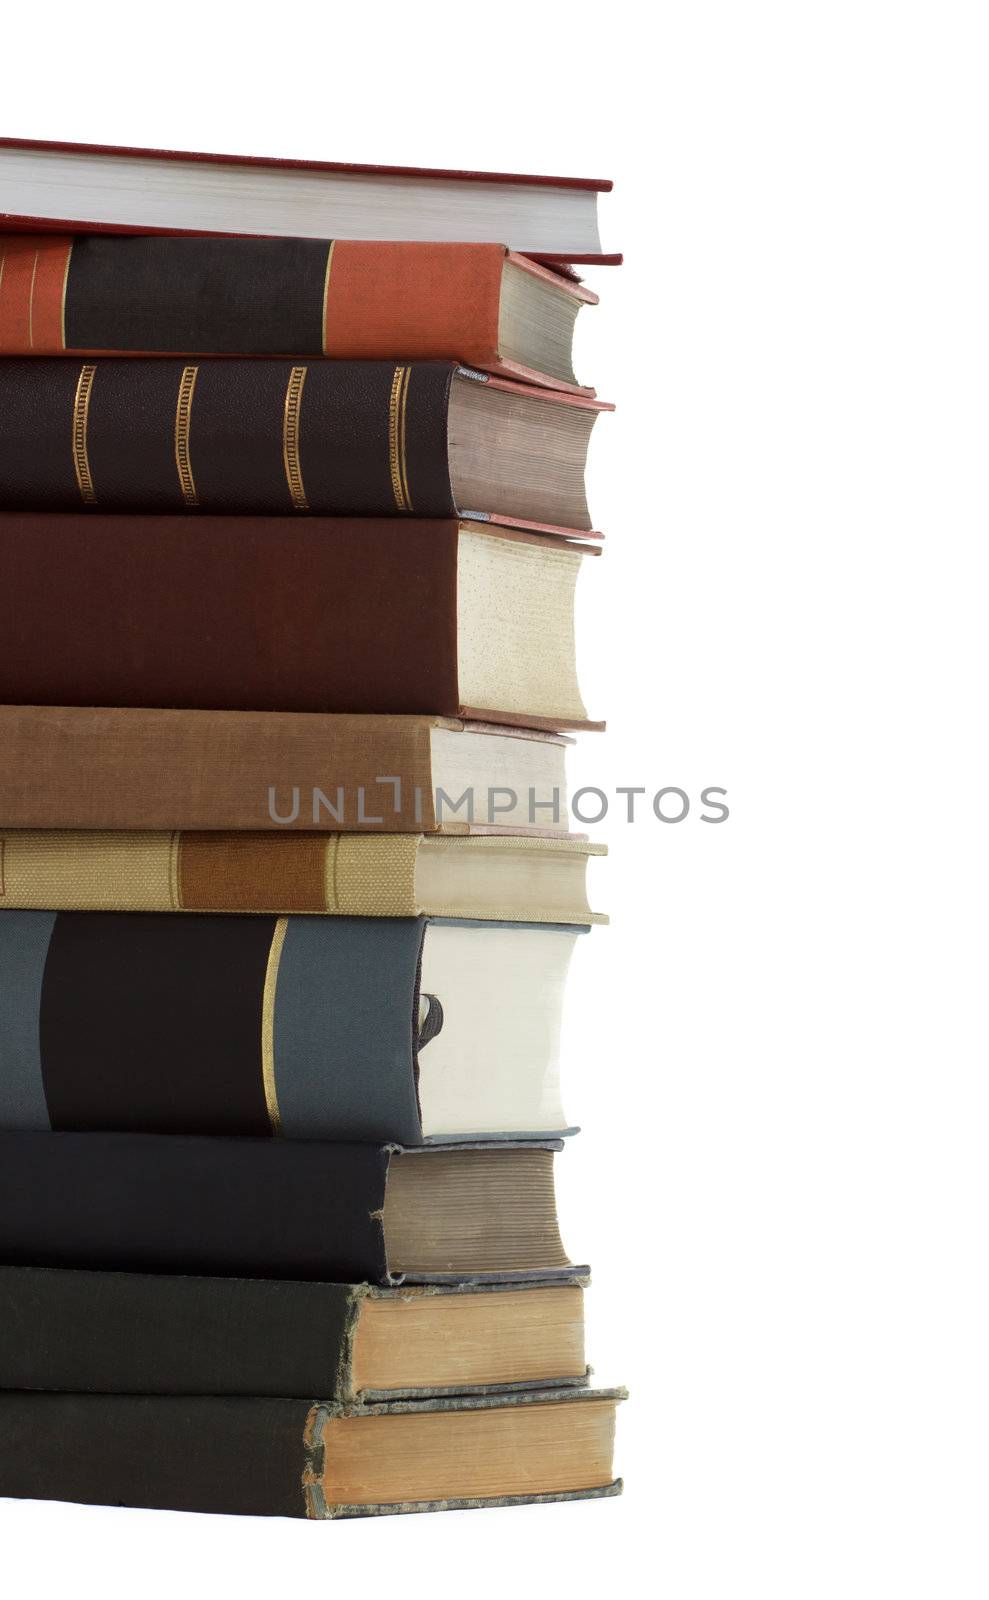 A Stack of Beautiful Antique Books (education, lerning, studying, wisdom) 